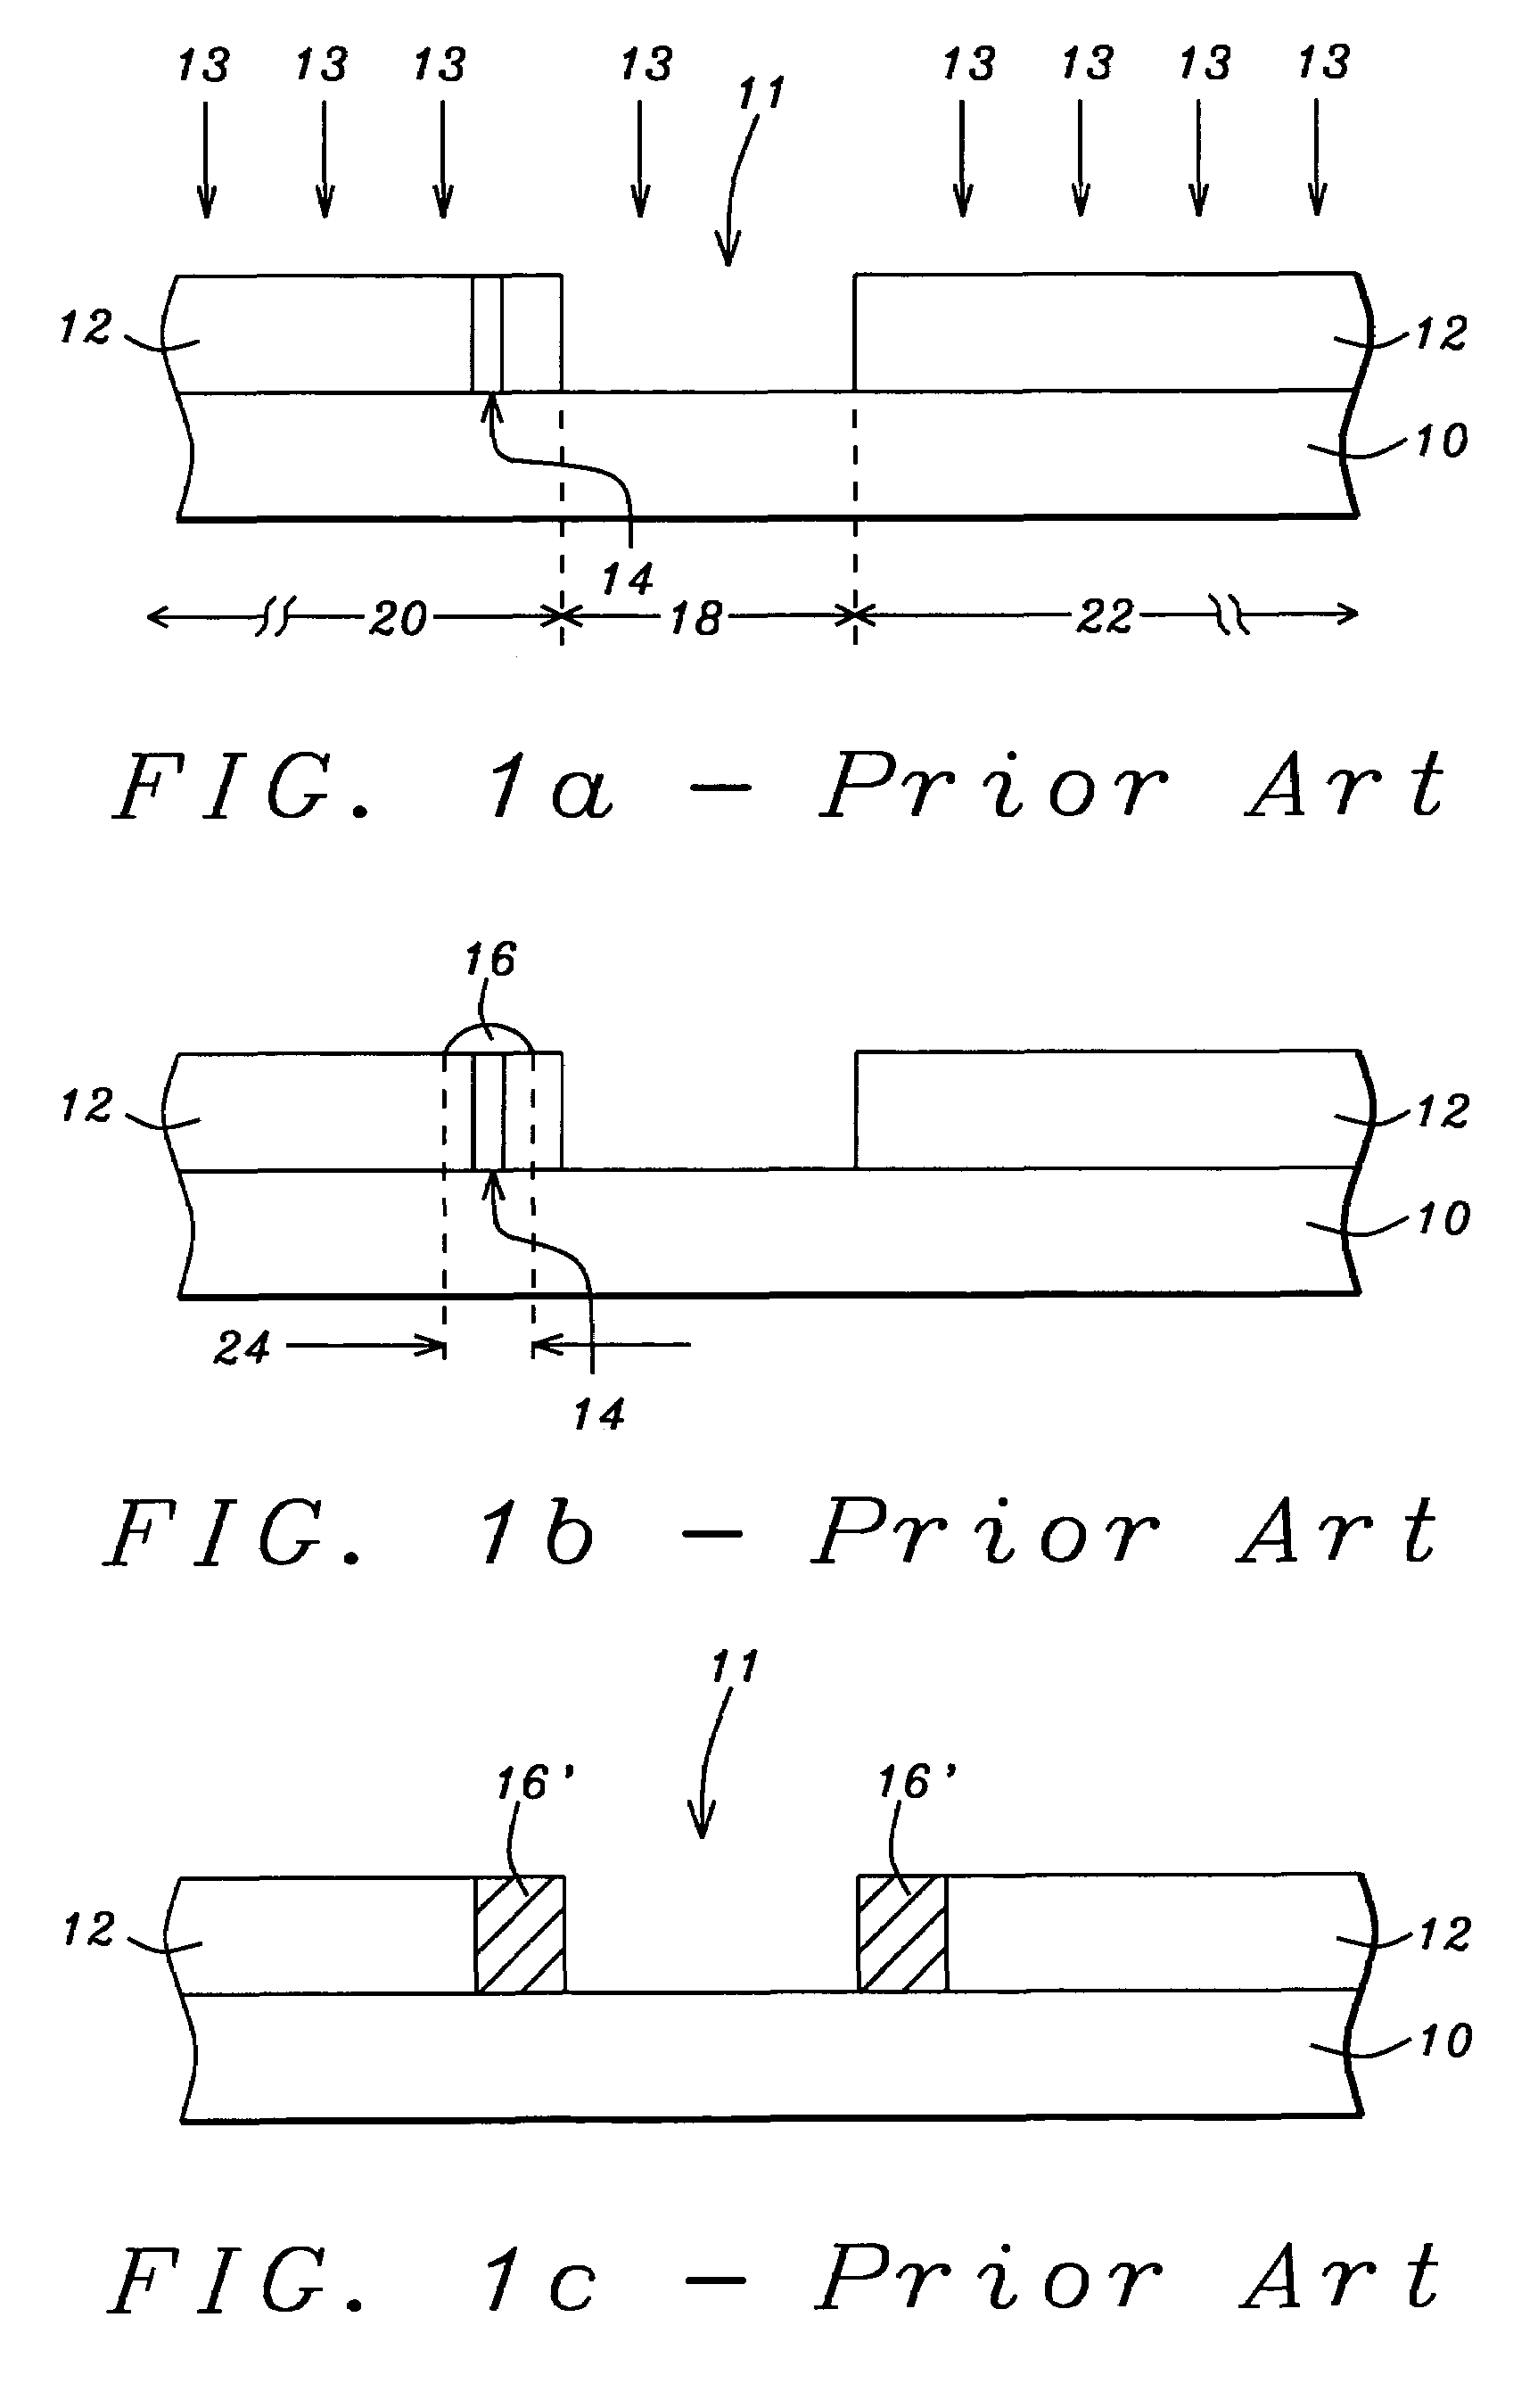 Single trench repair method with etched quartz for attenuated phase shifting mask